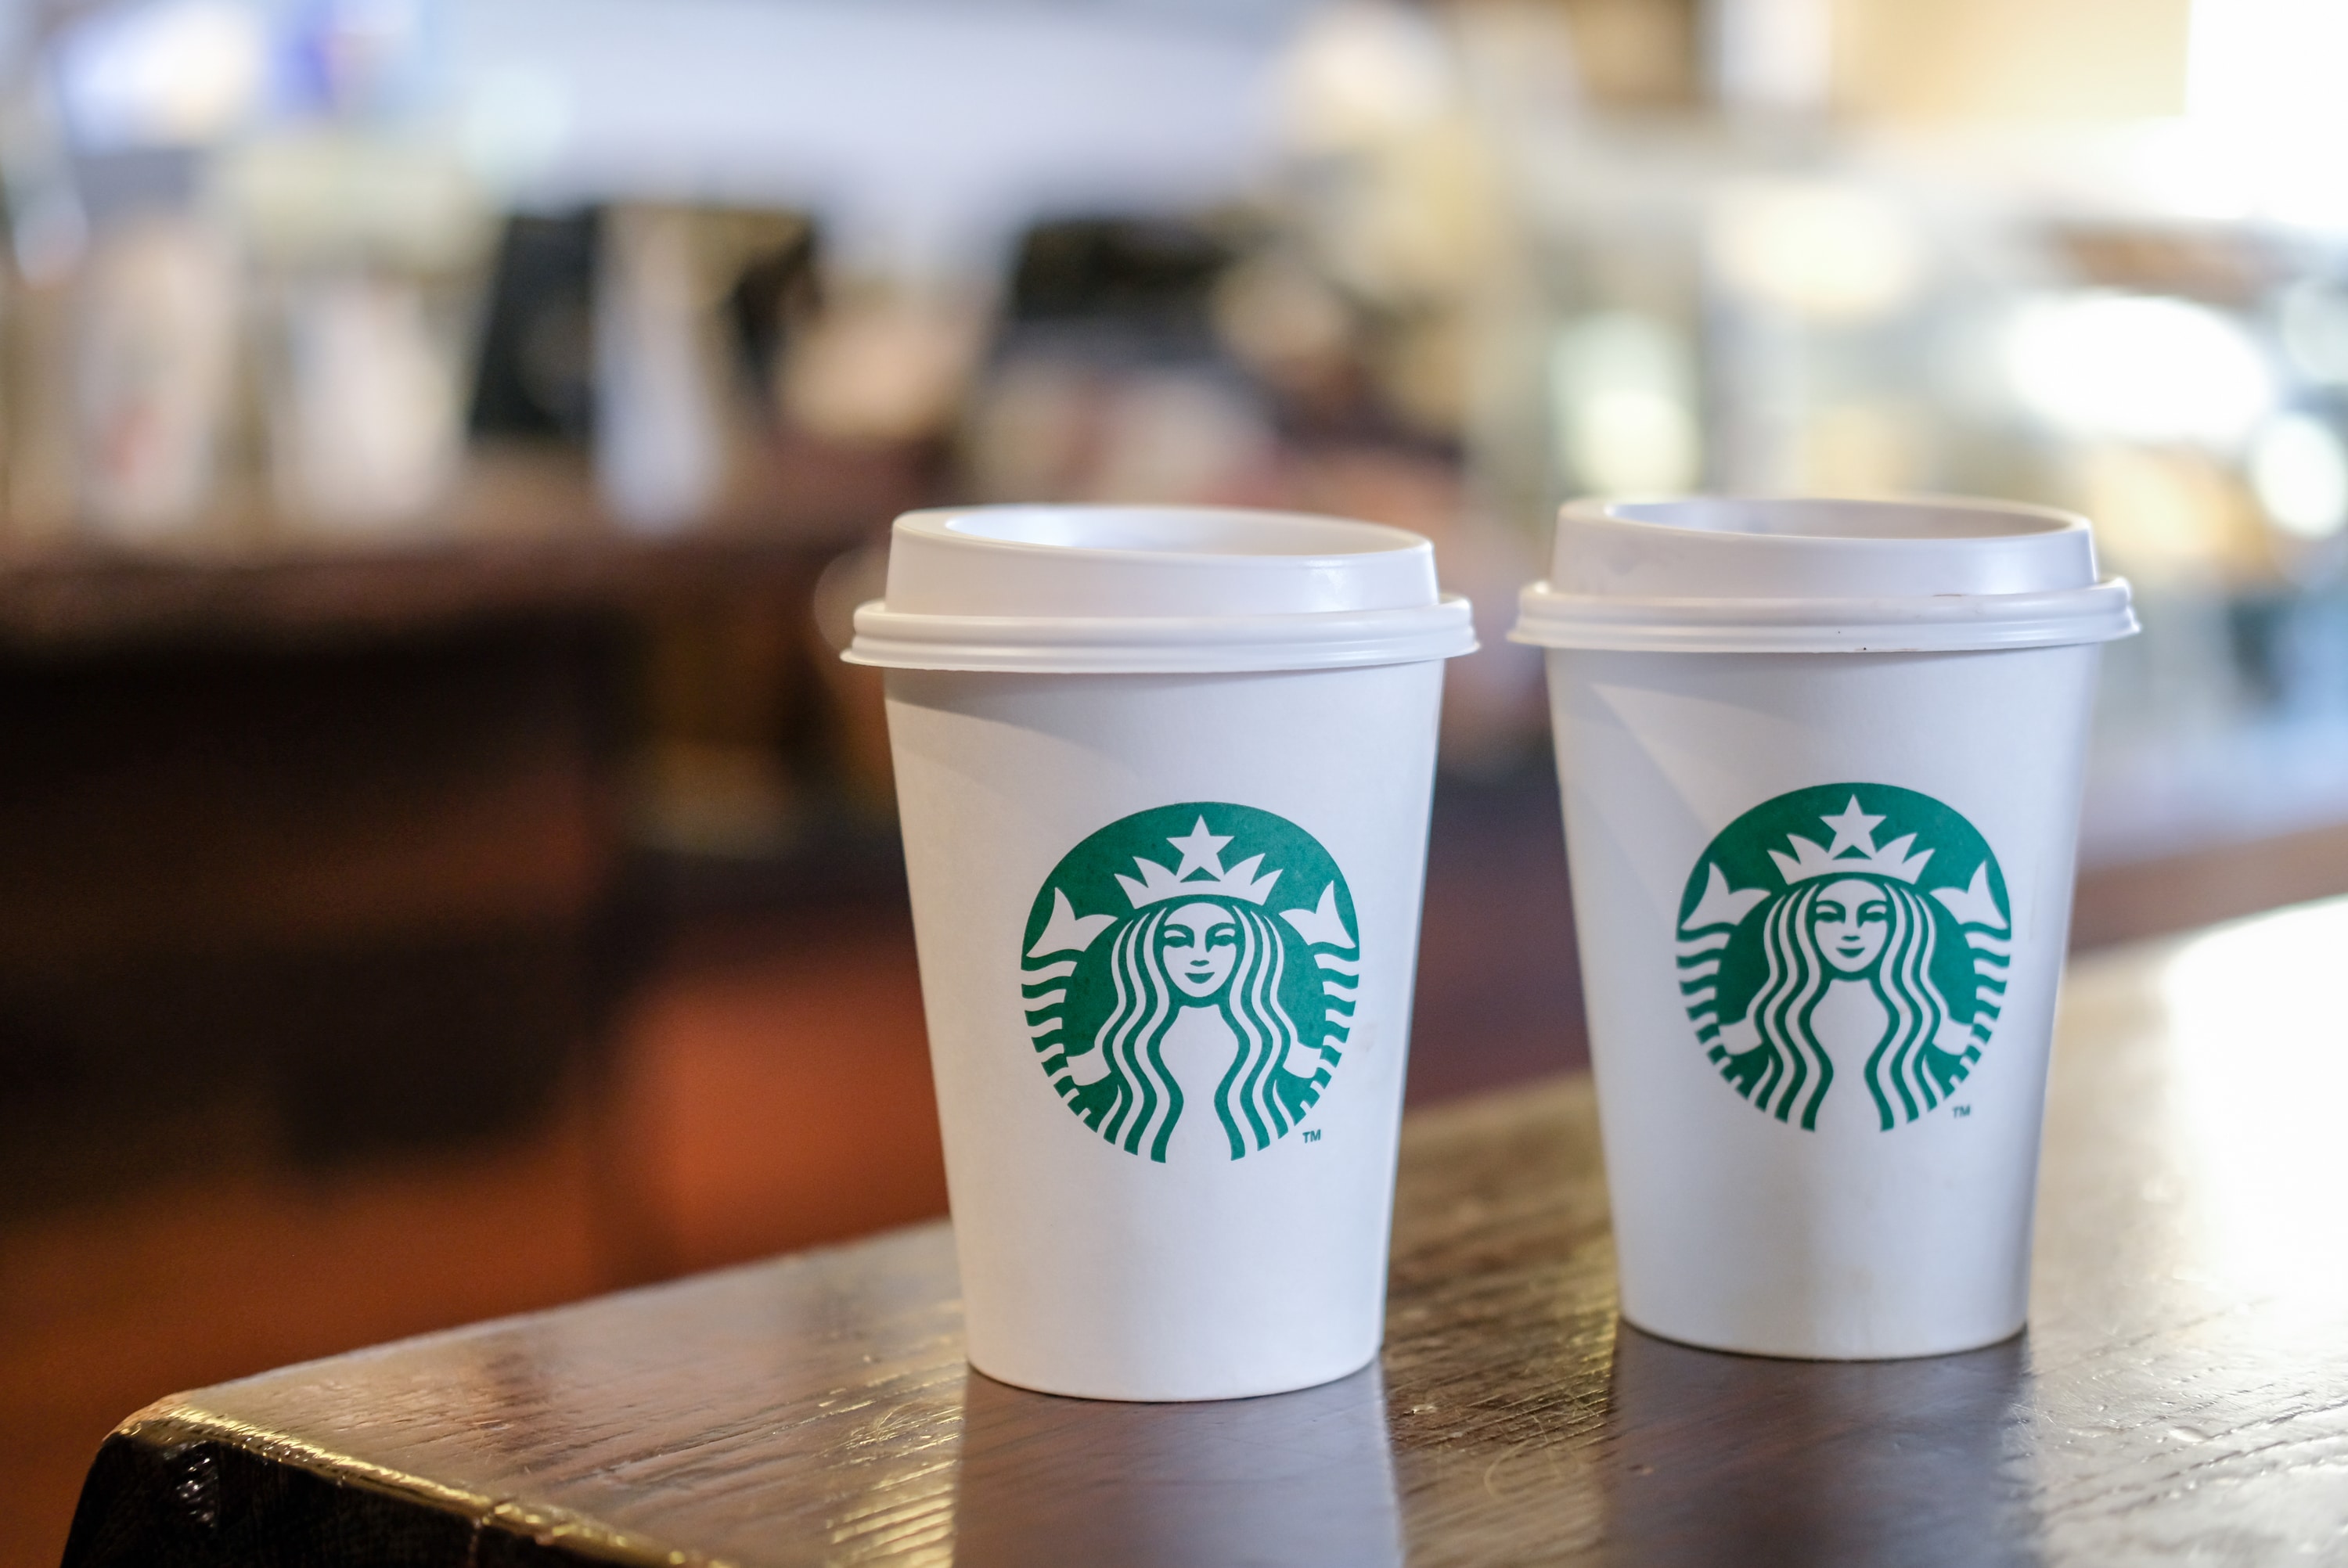 Starbucks offering free reusable cups Thursday: How to get yours